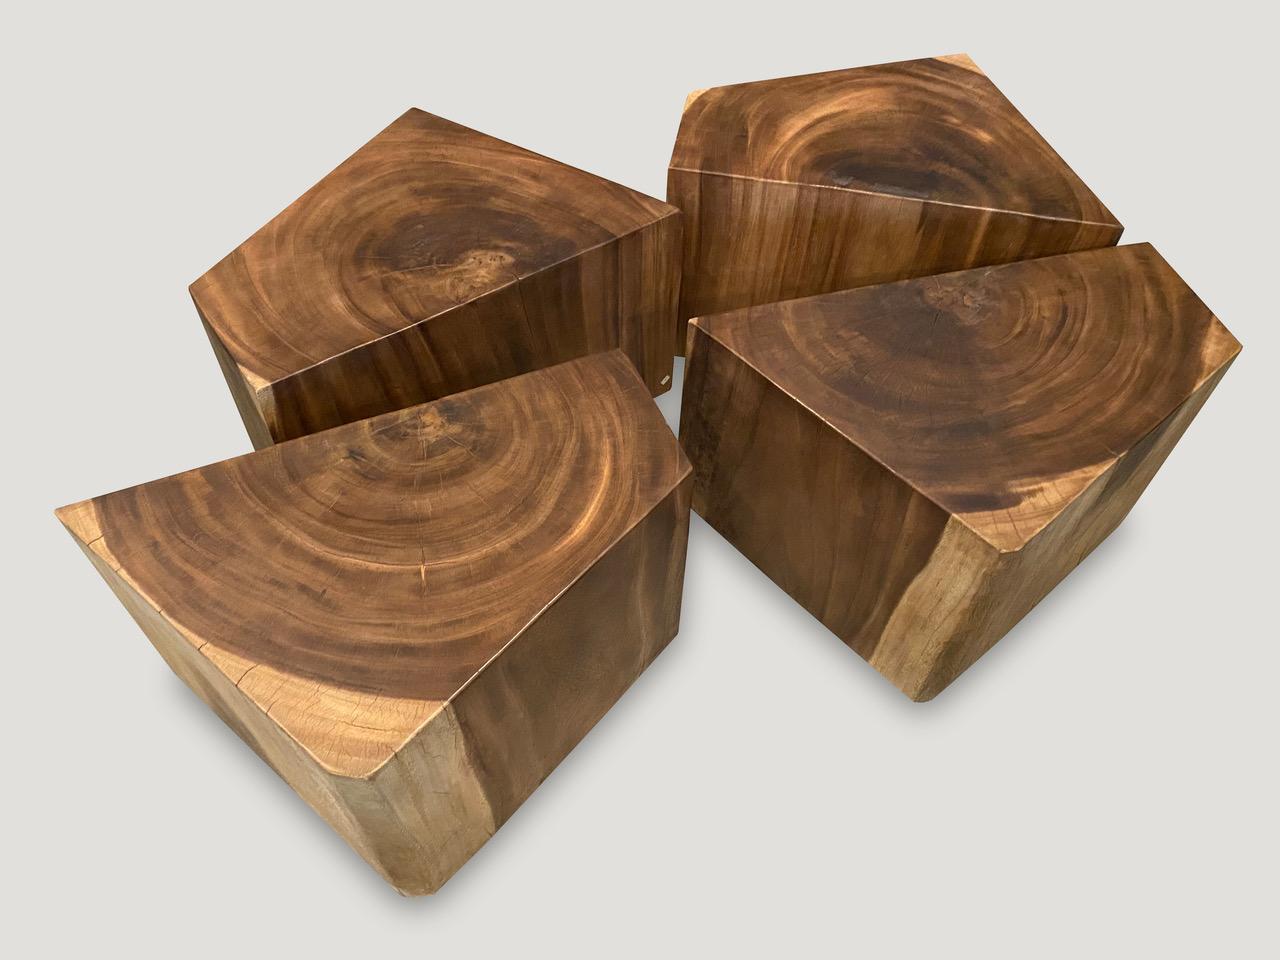 Andrianna Shamaris Reclaimed Wood Modular Coffee Table or Side Tables In Excellent Condition For Sale In New York, NY